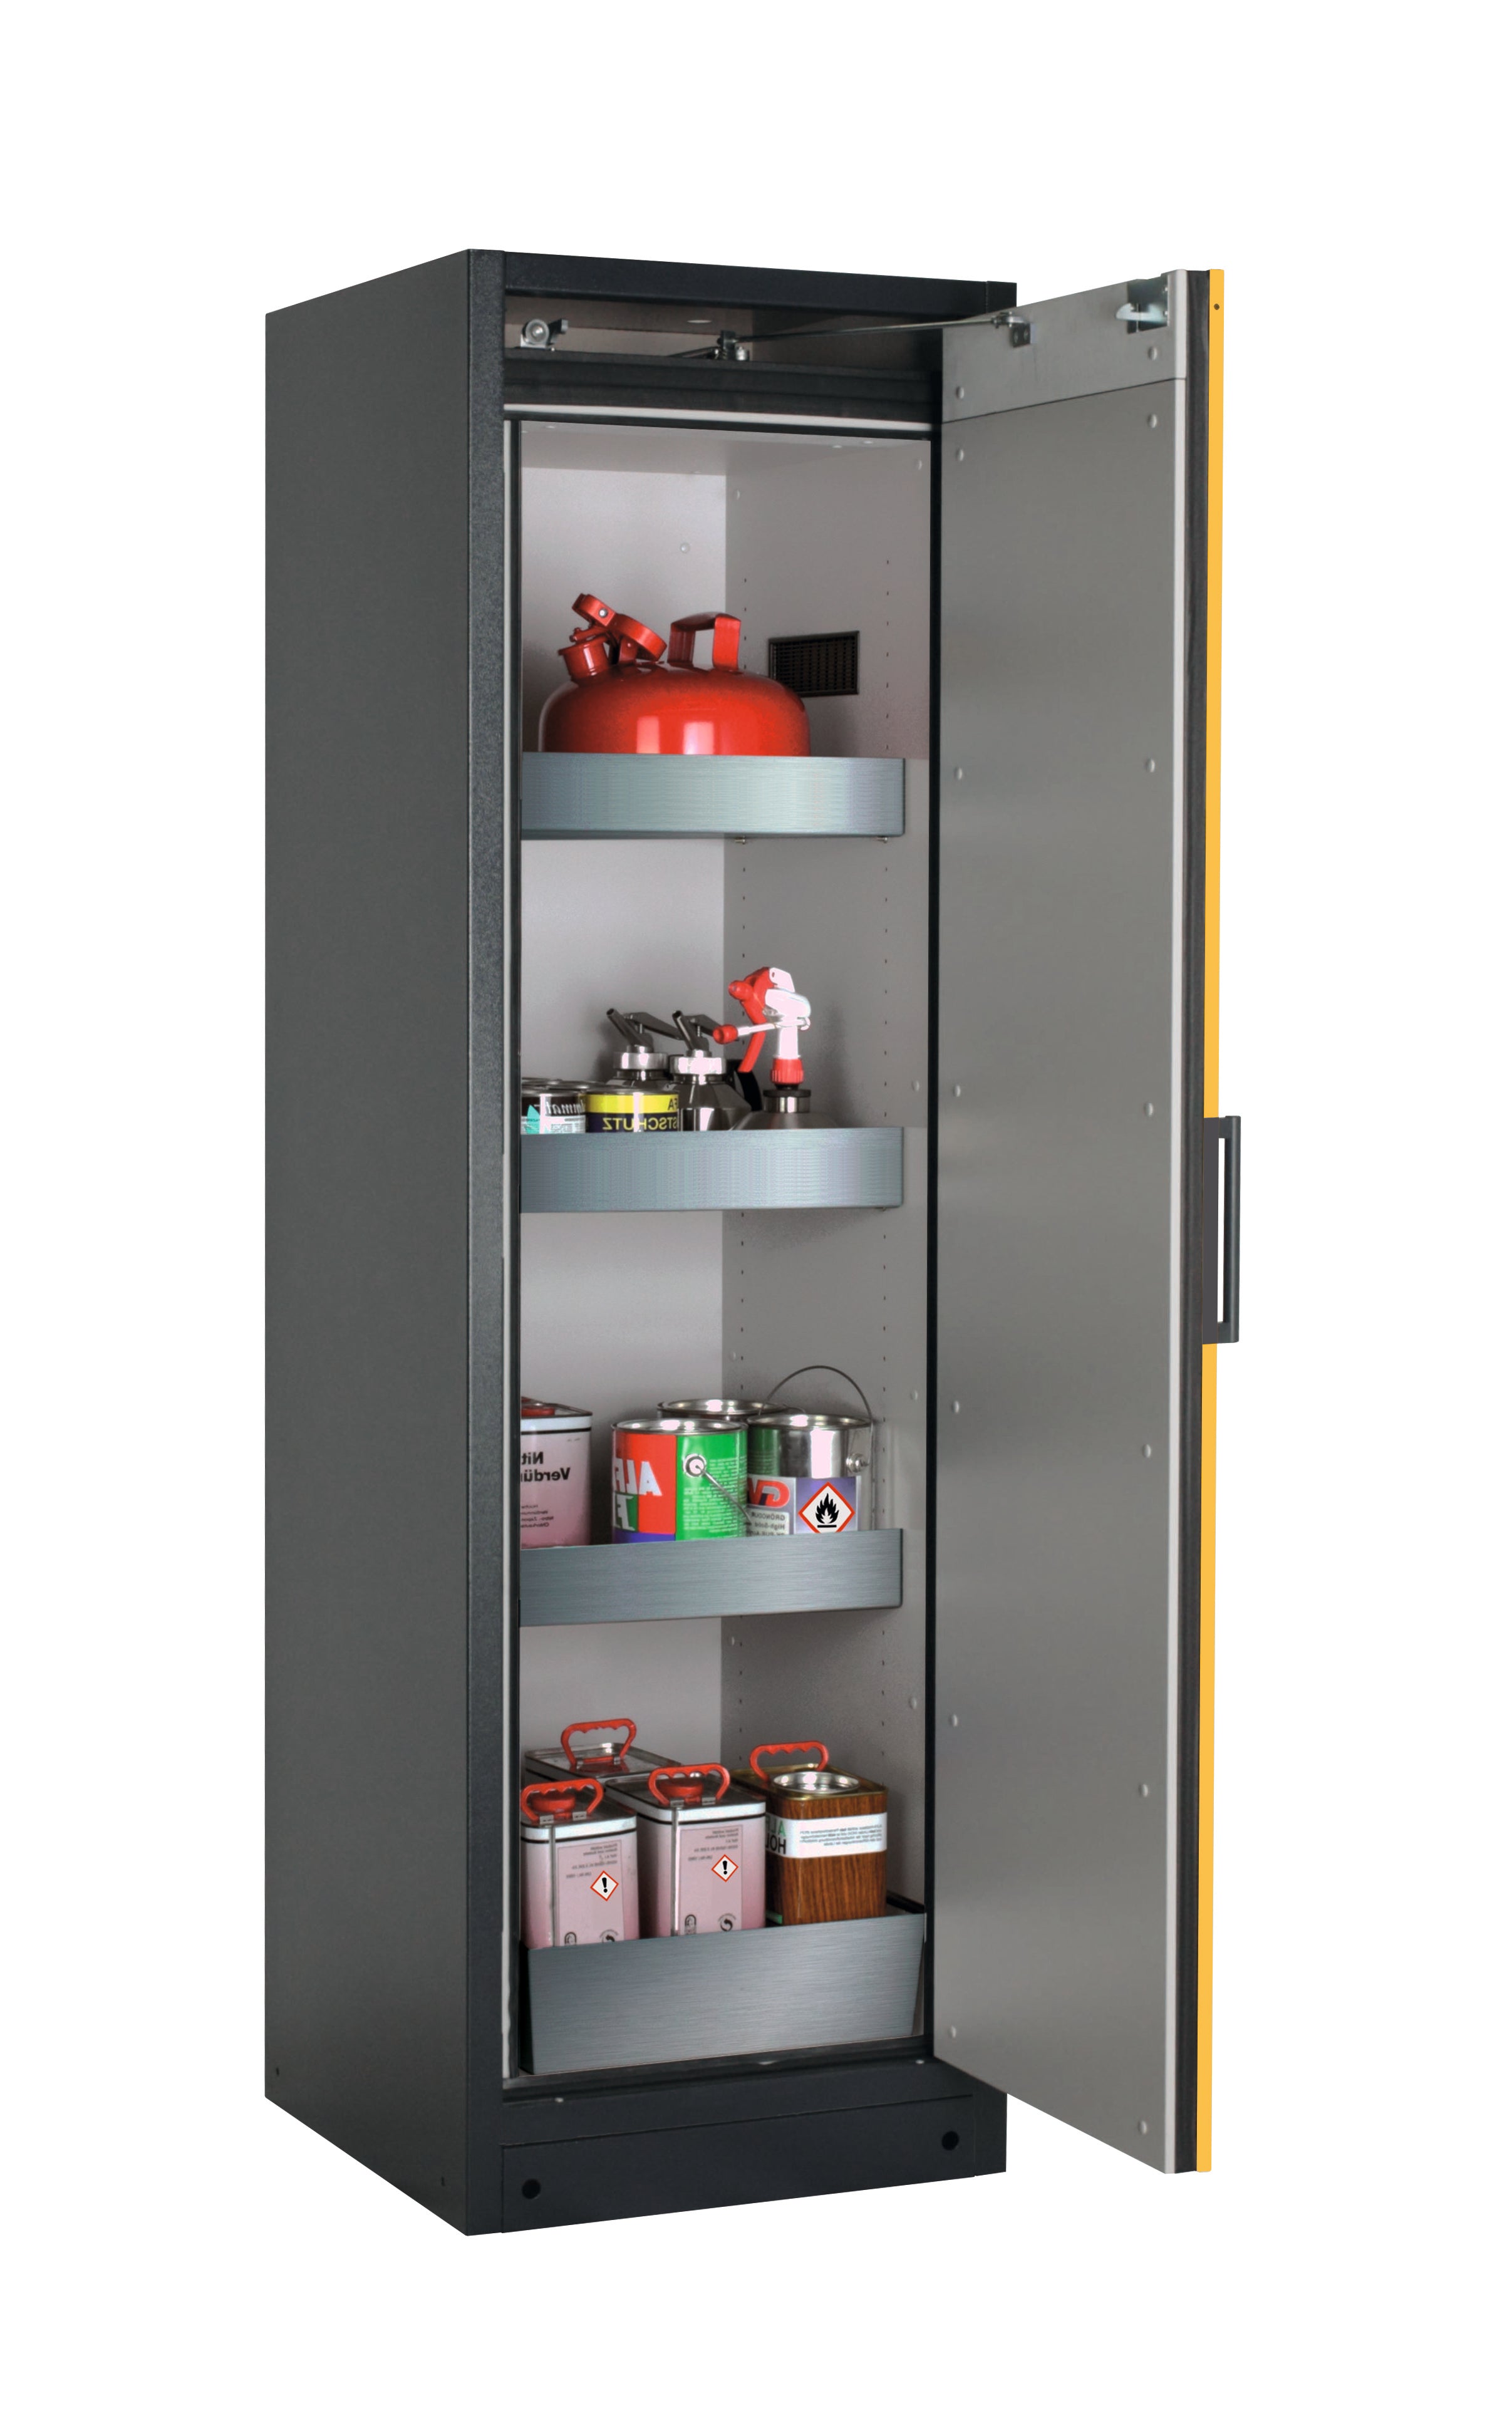 Type 90 safety storage cabinet Q-PEGASUS-90 model Q90.195.060.WDACR in warning yellow RAL 1004 with 3x tray shelf (standard) (stainless steel 1.4301),